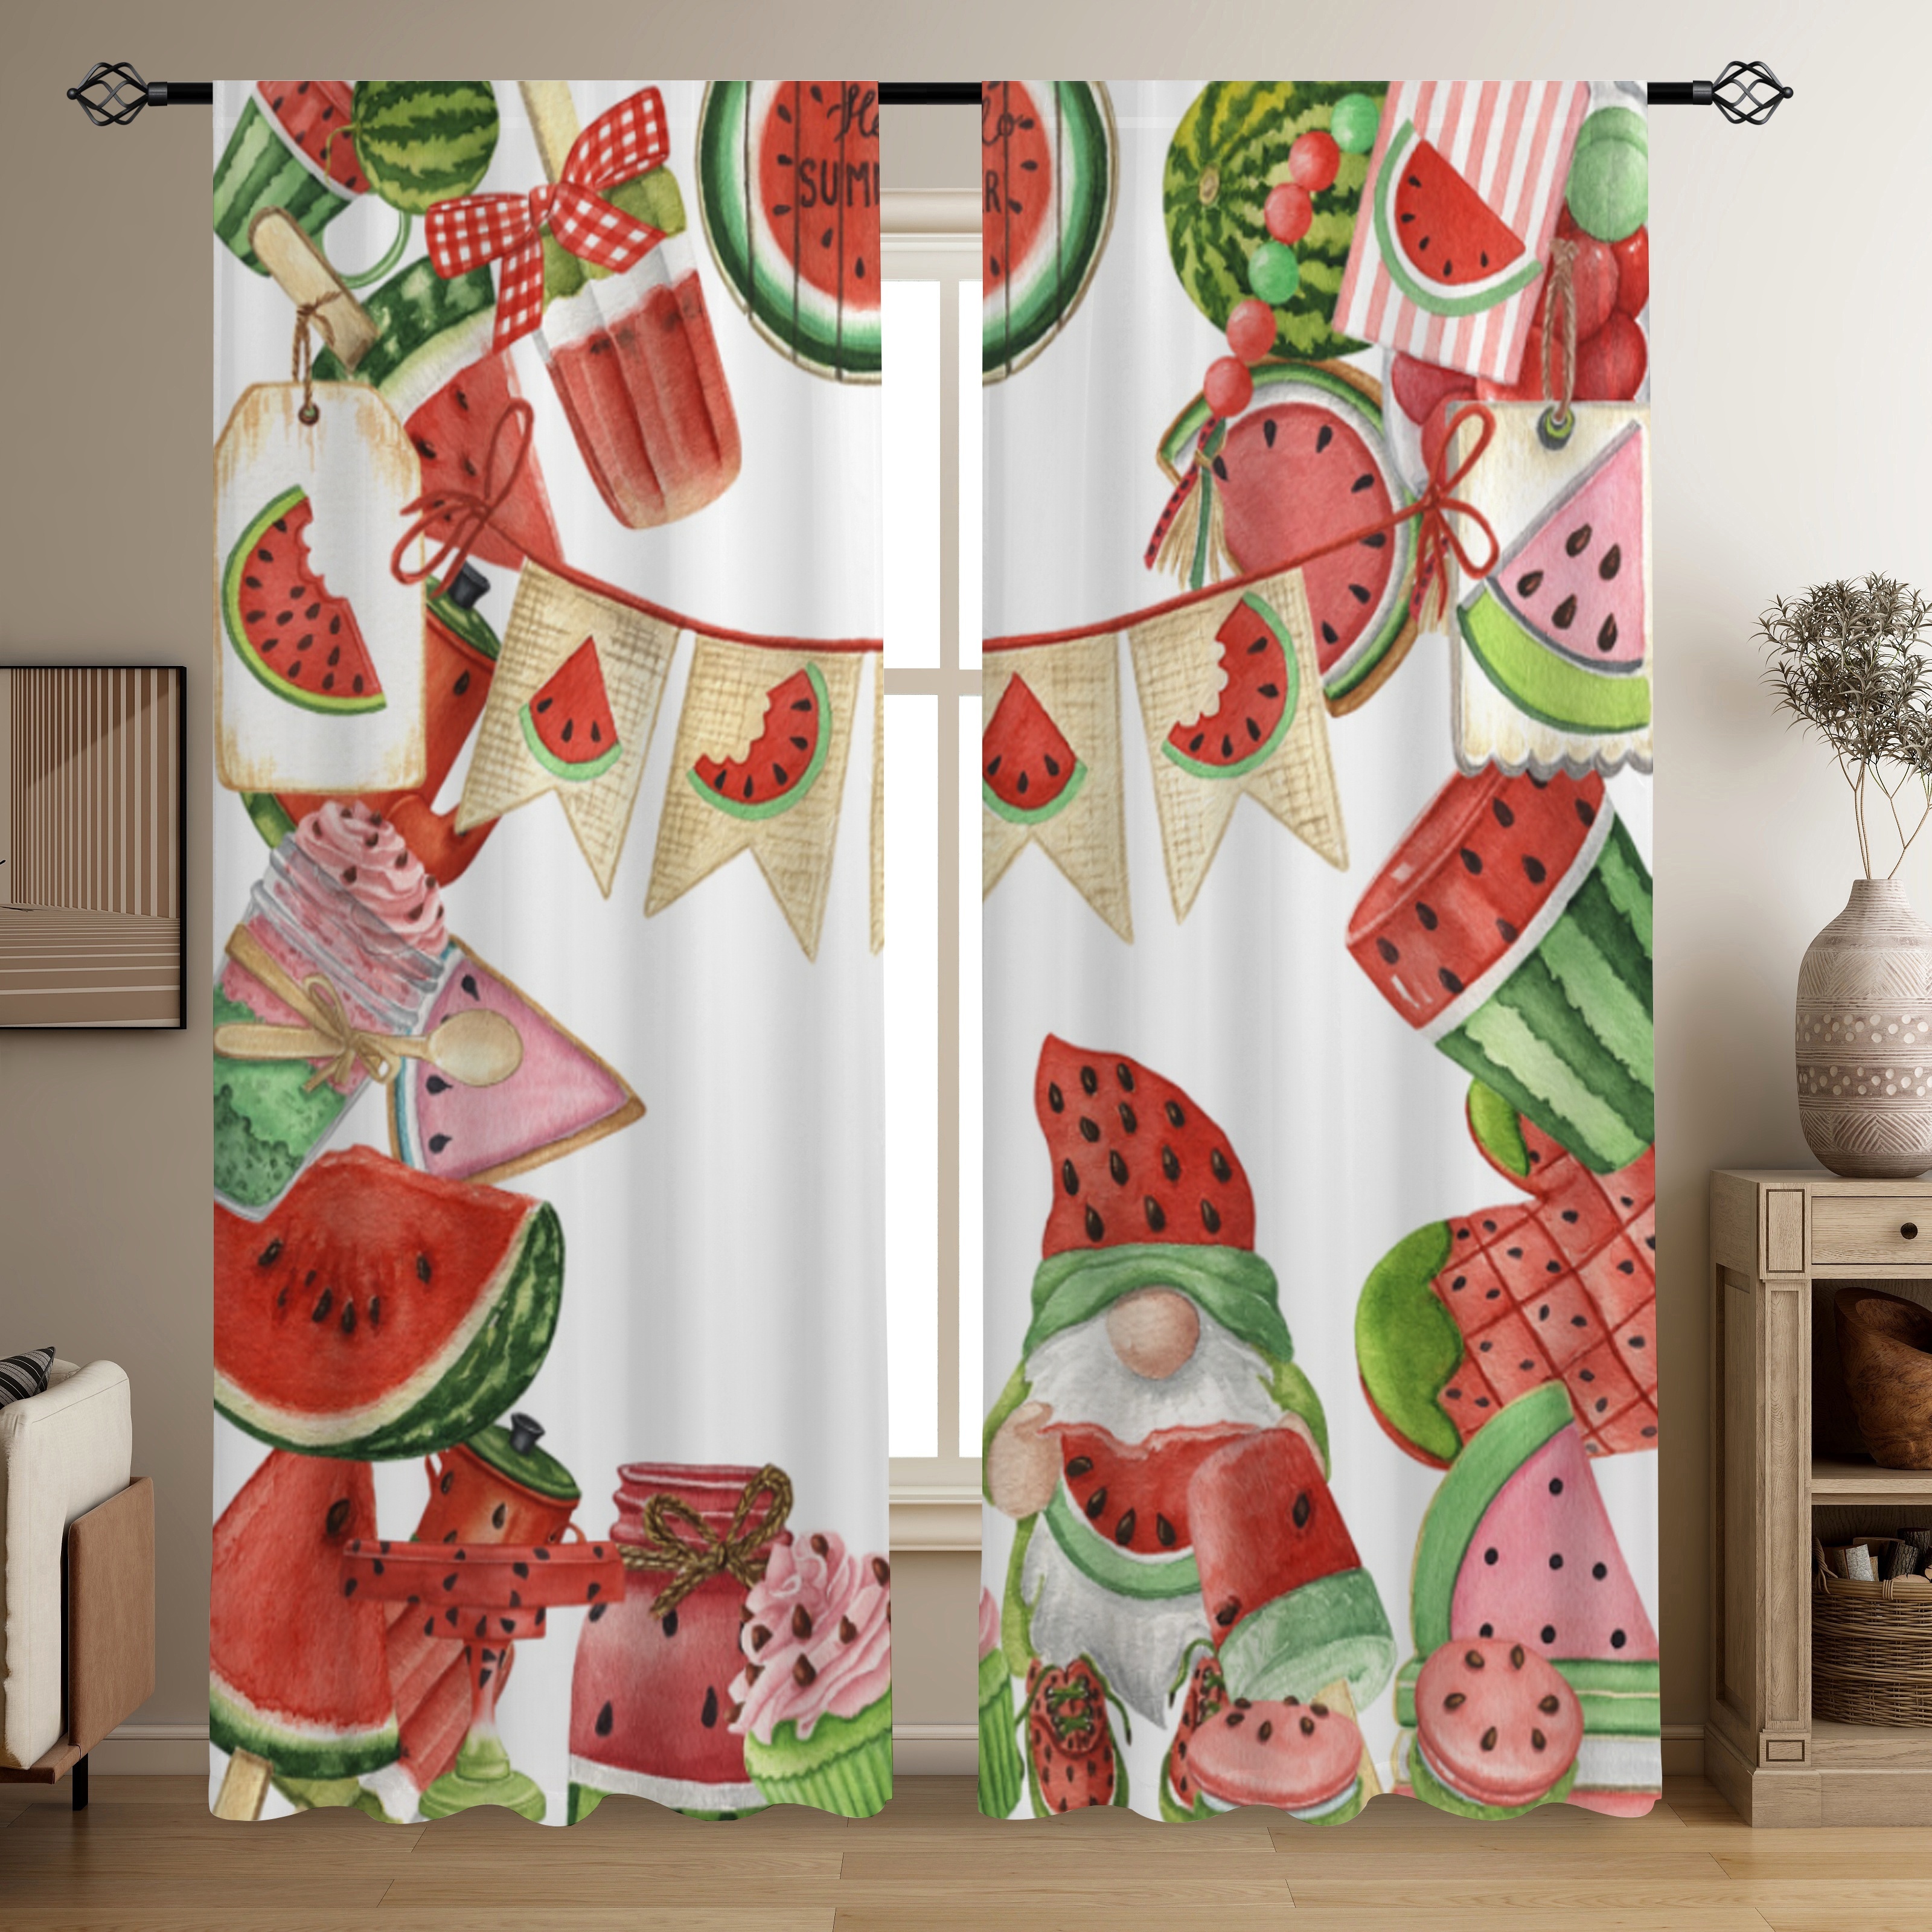 

2pcs, Summer Watermelon Gnome Dwarf Printed Translucent Curtains, Living Room Playroom Bedroom Multi-scene Polyester Rod Pocket Decorative Curtains Home Decor Party Supplies